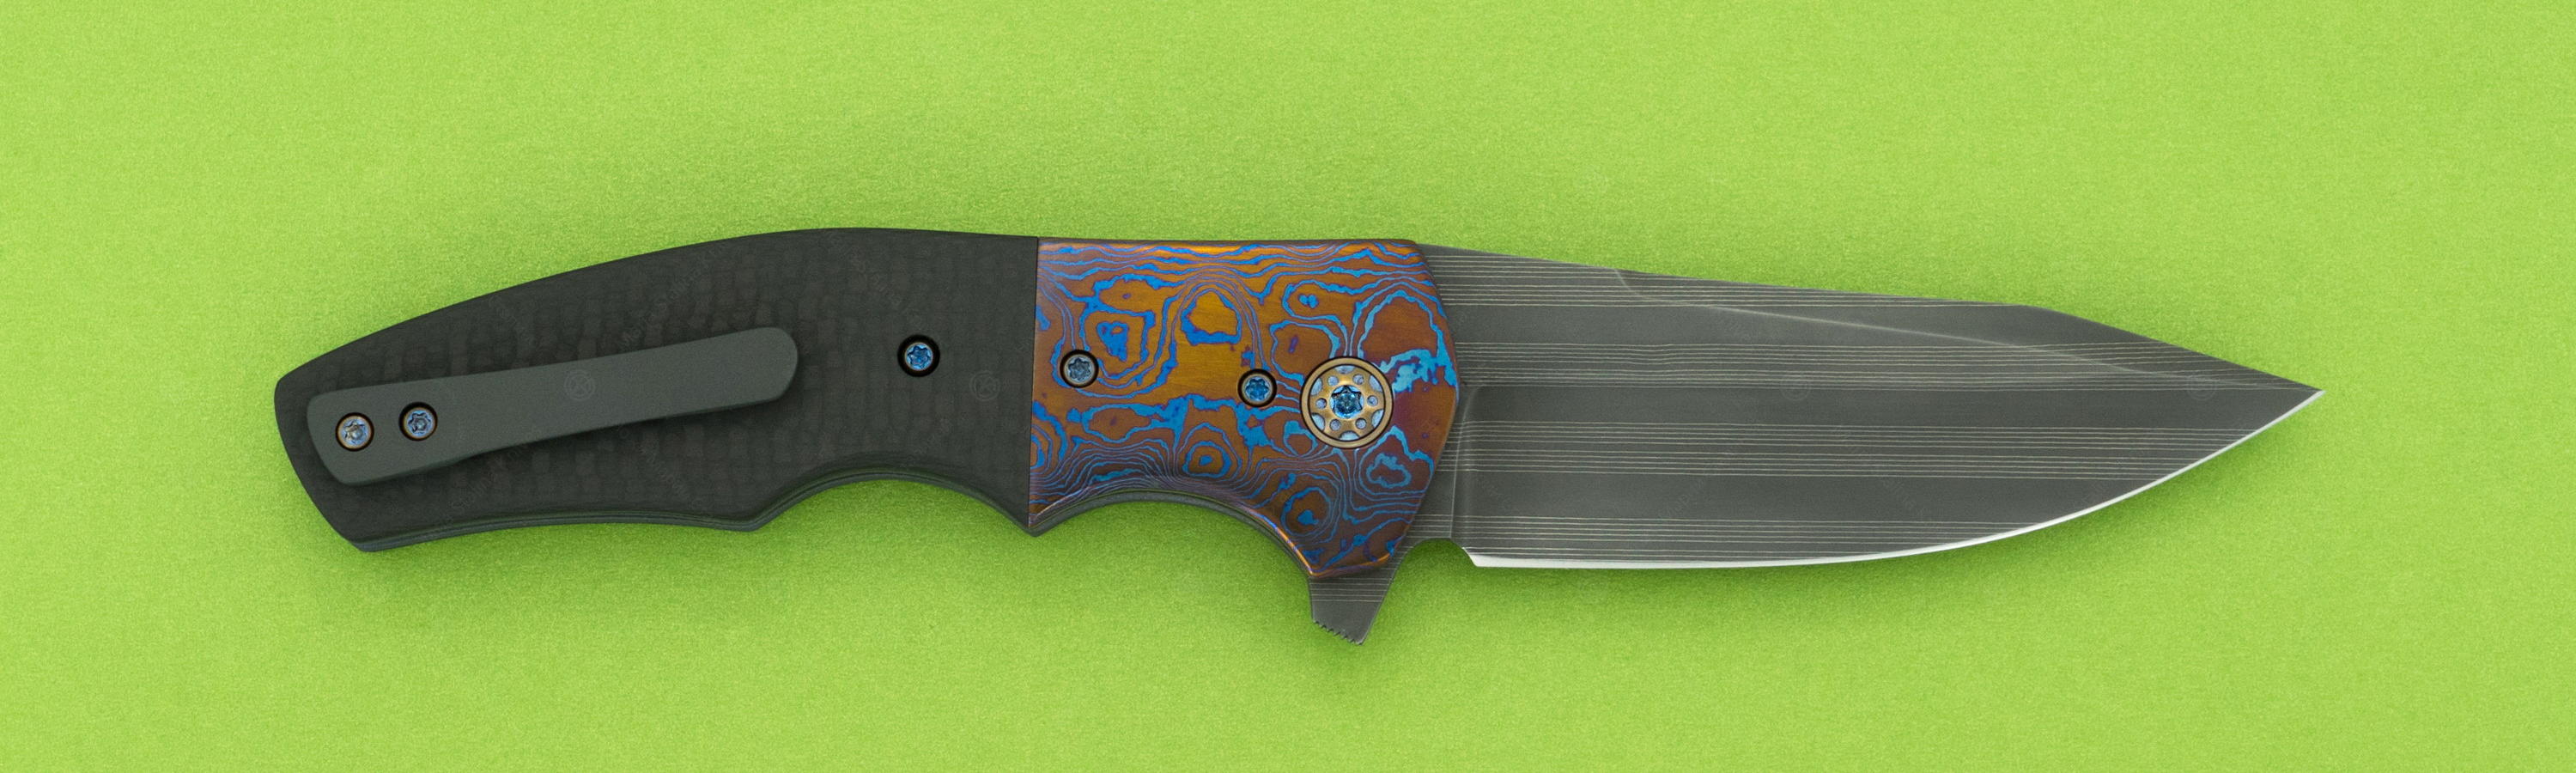 Blade material	is Chad Nichols Damascus